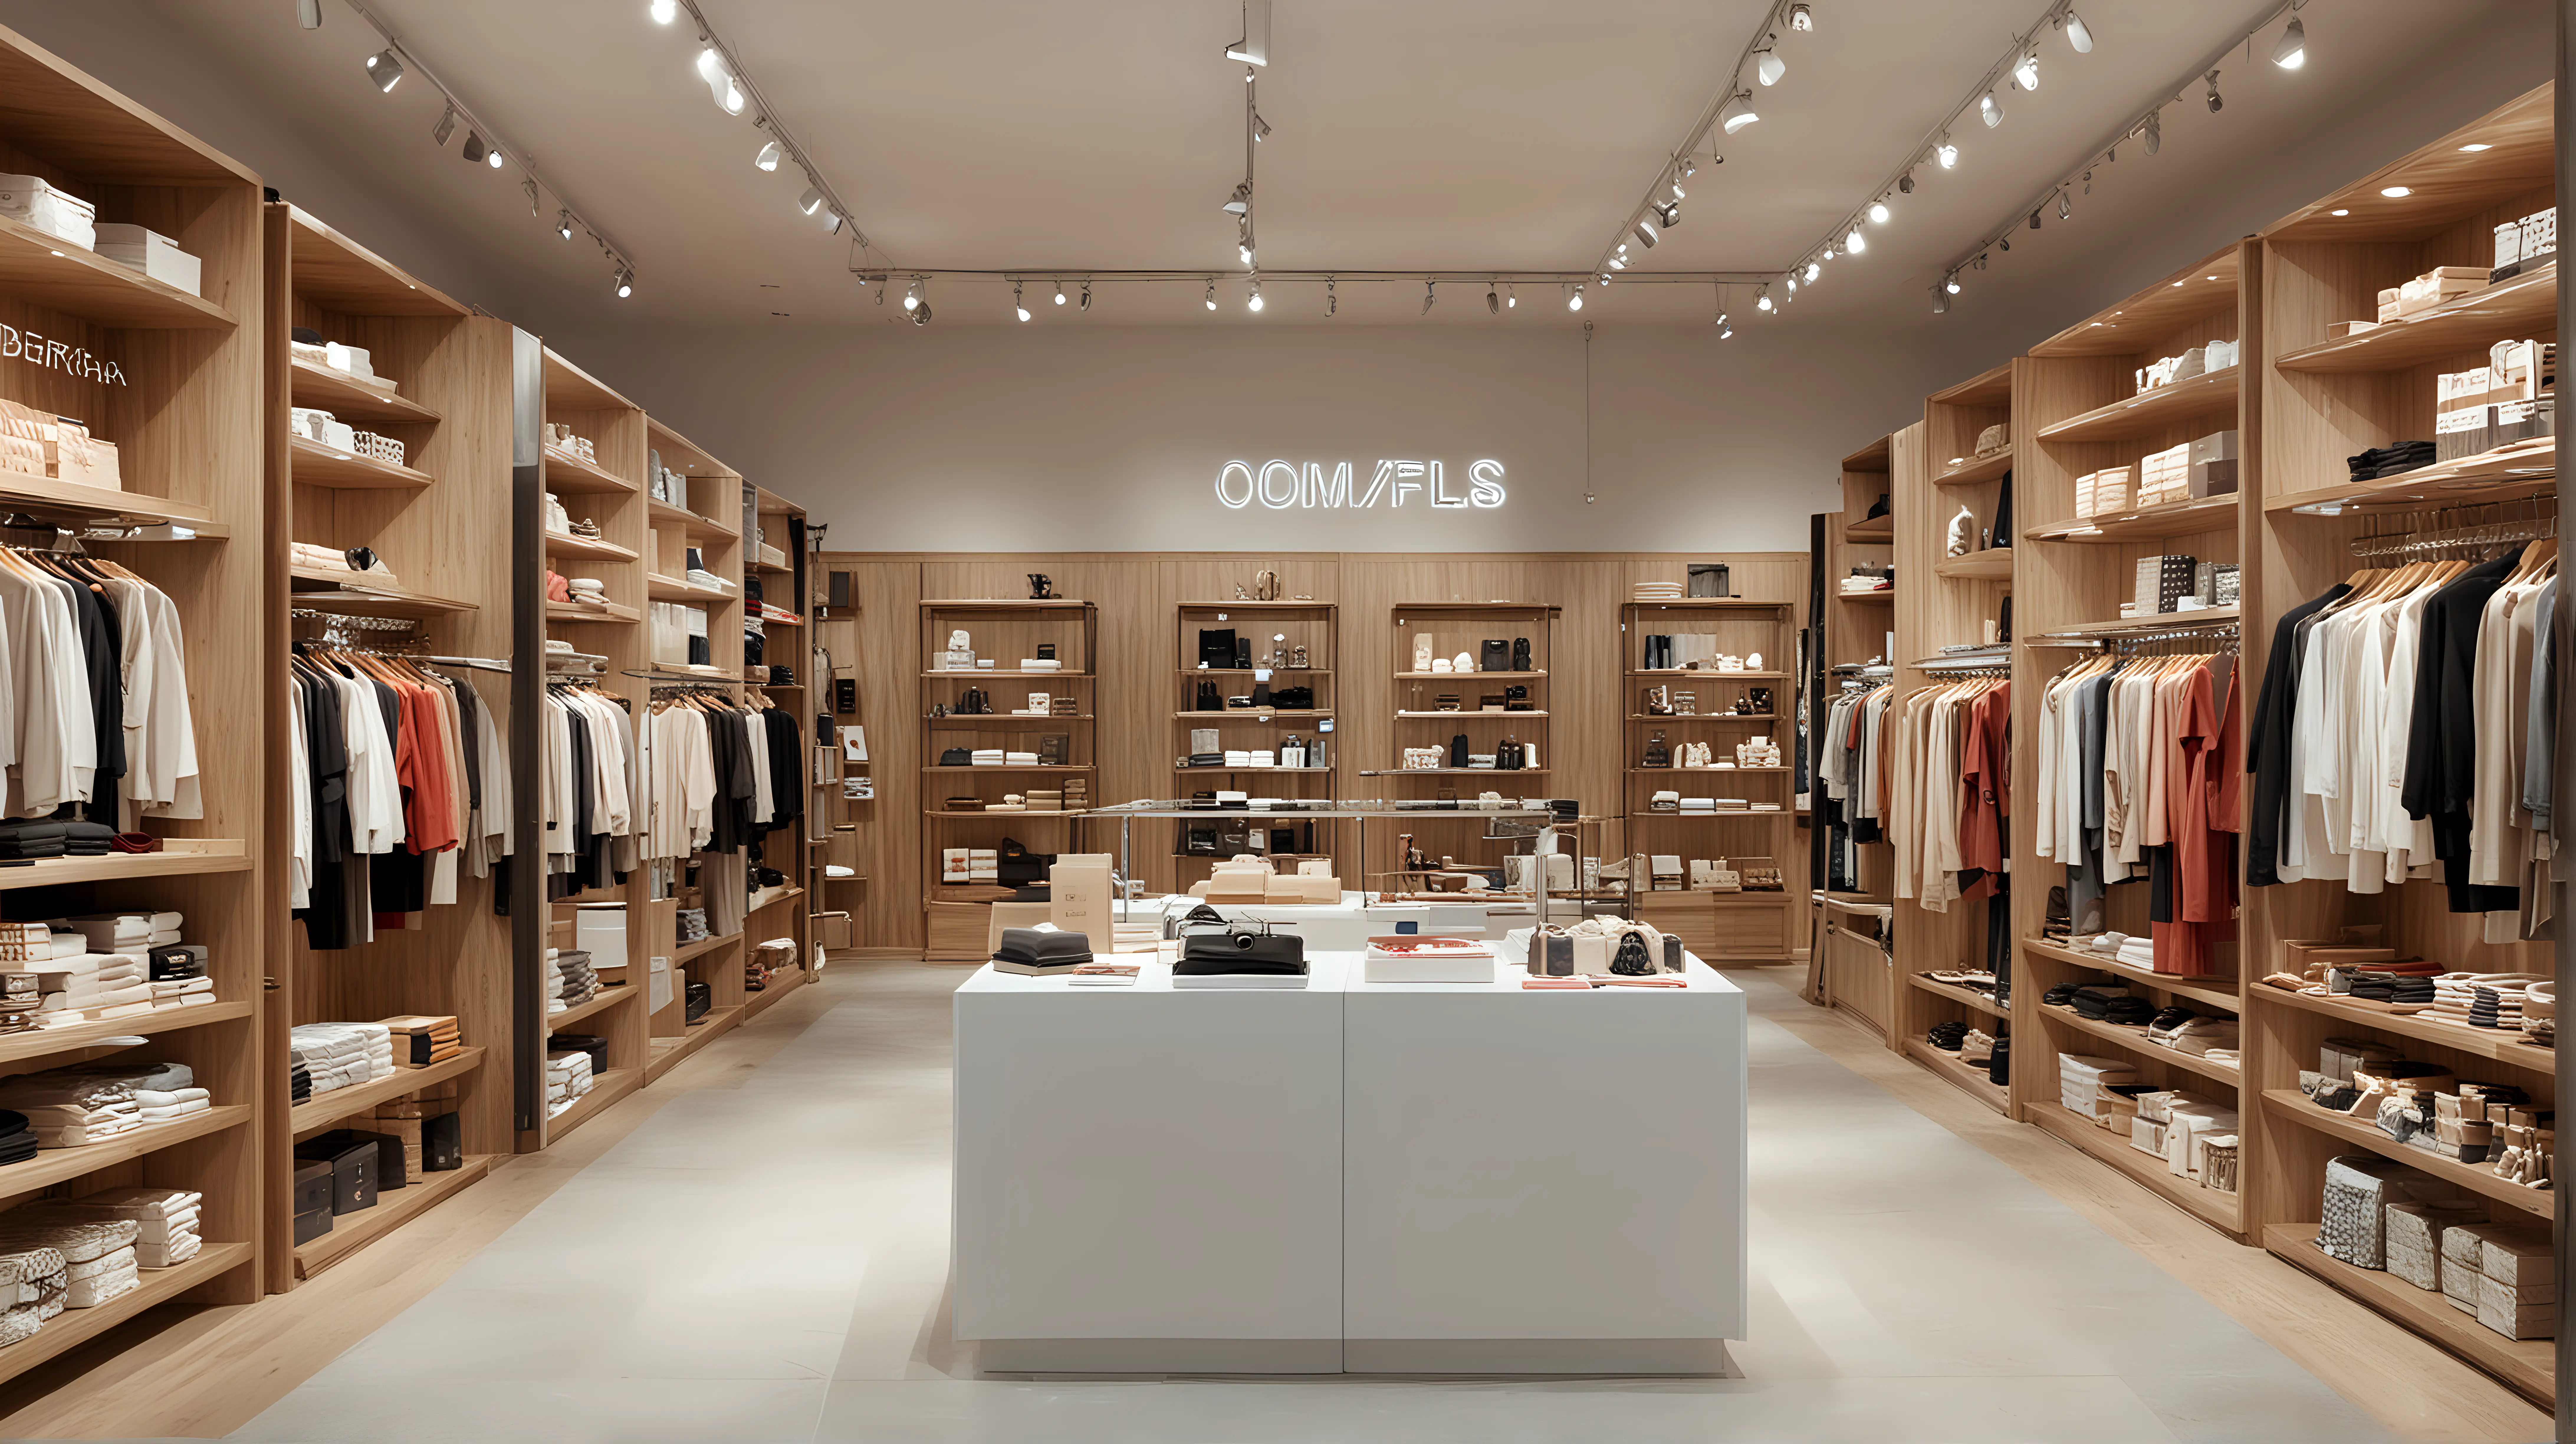 Modern Retail Shop Design with Clean Lines and Bright Lighting